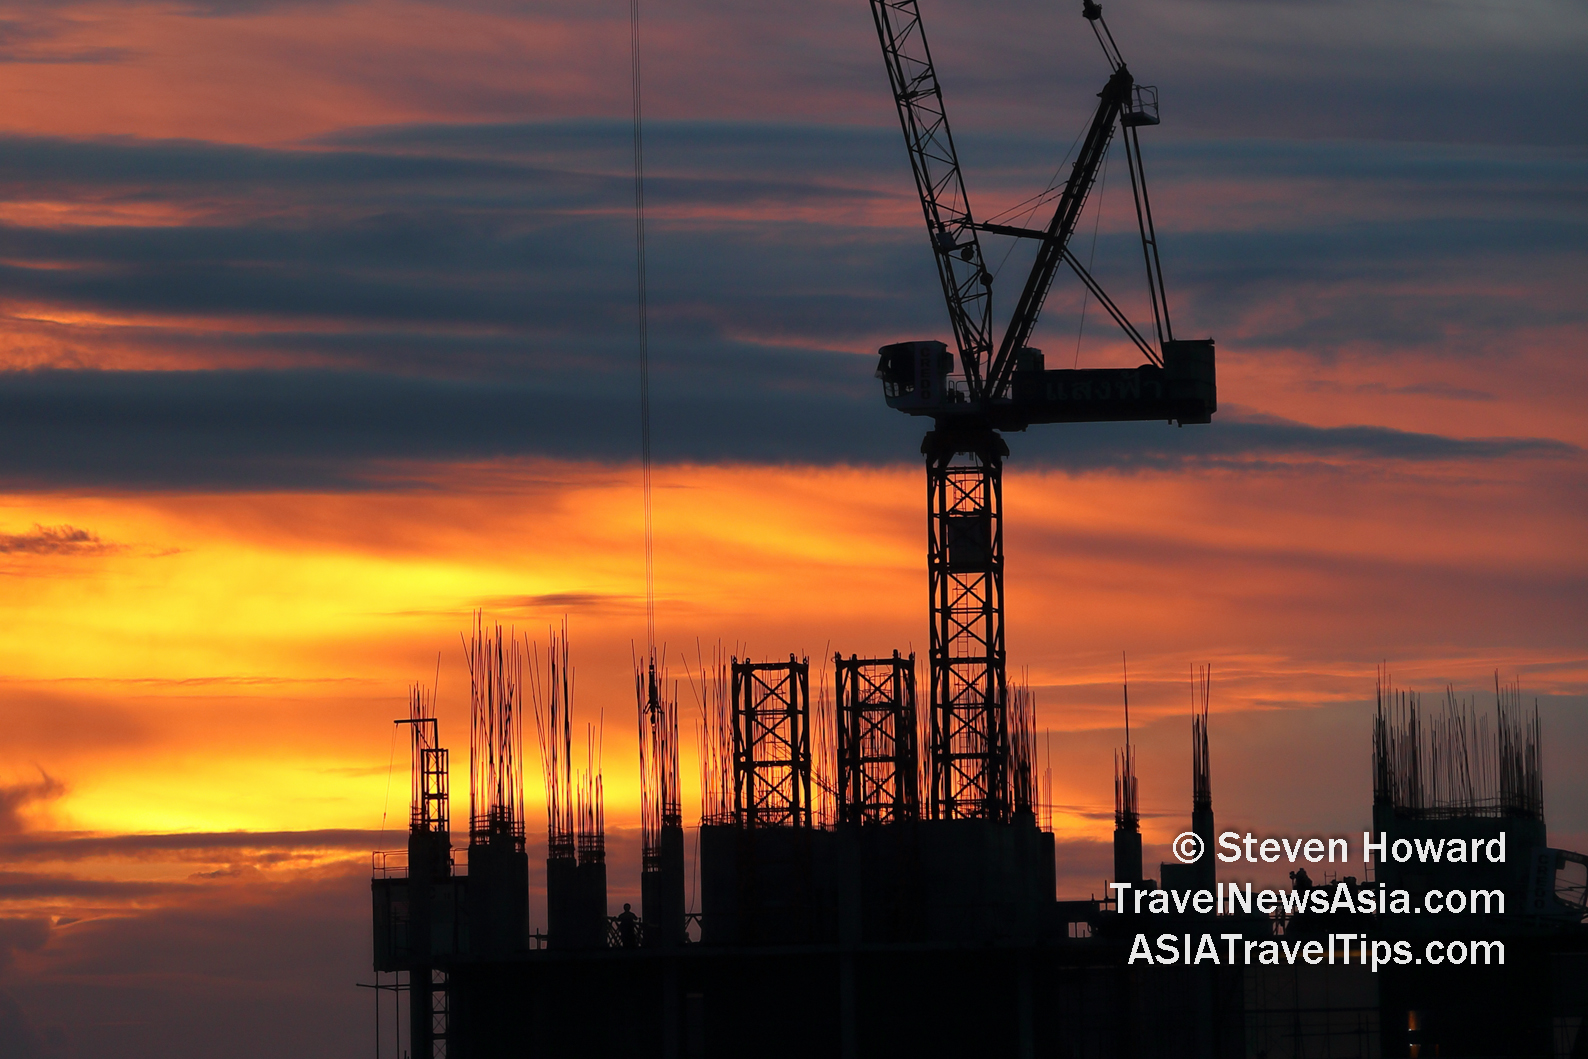 Construction and a beautiful, fiery sunset in Greater Bangkok, Thailand. Picture by Steven Howard of TravelNewsAsia.com Click to enlarge.